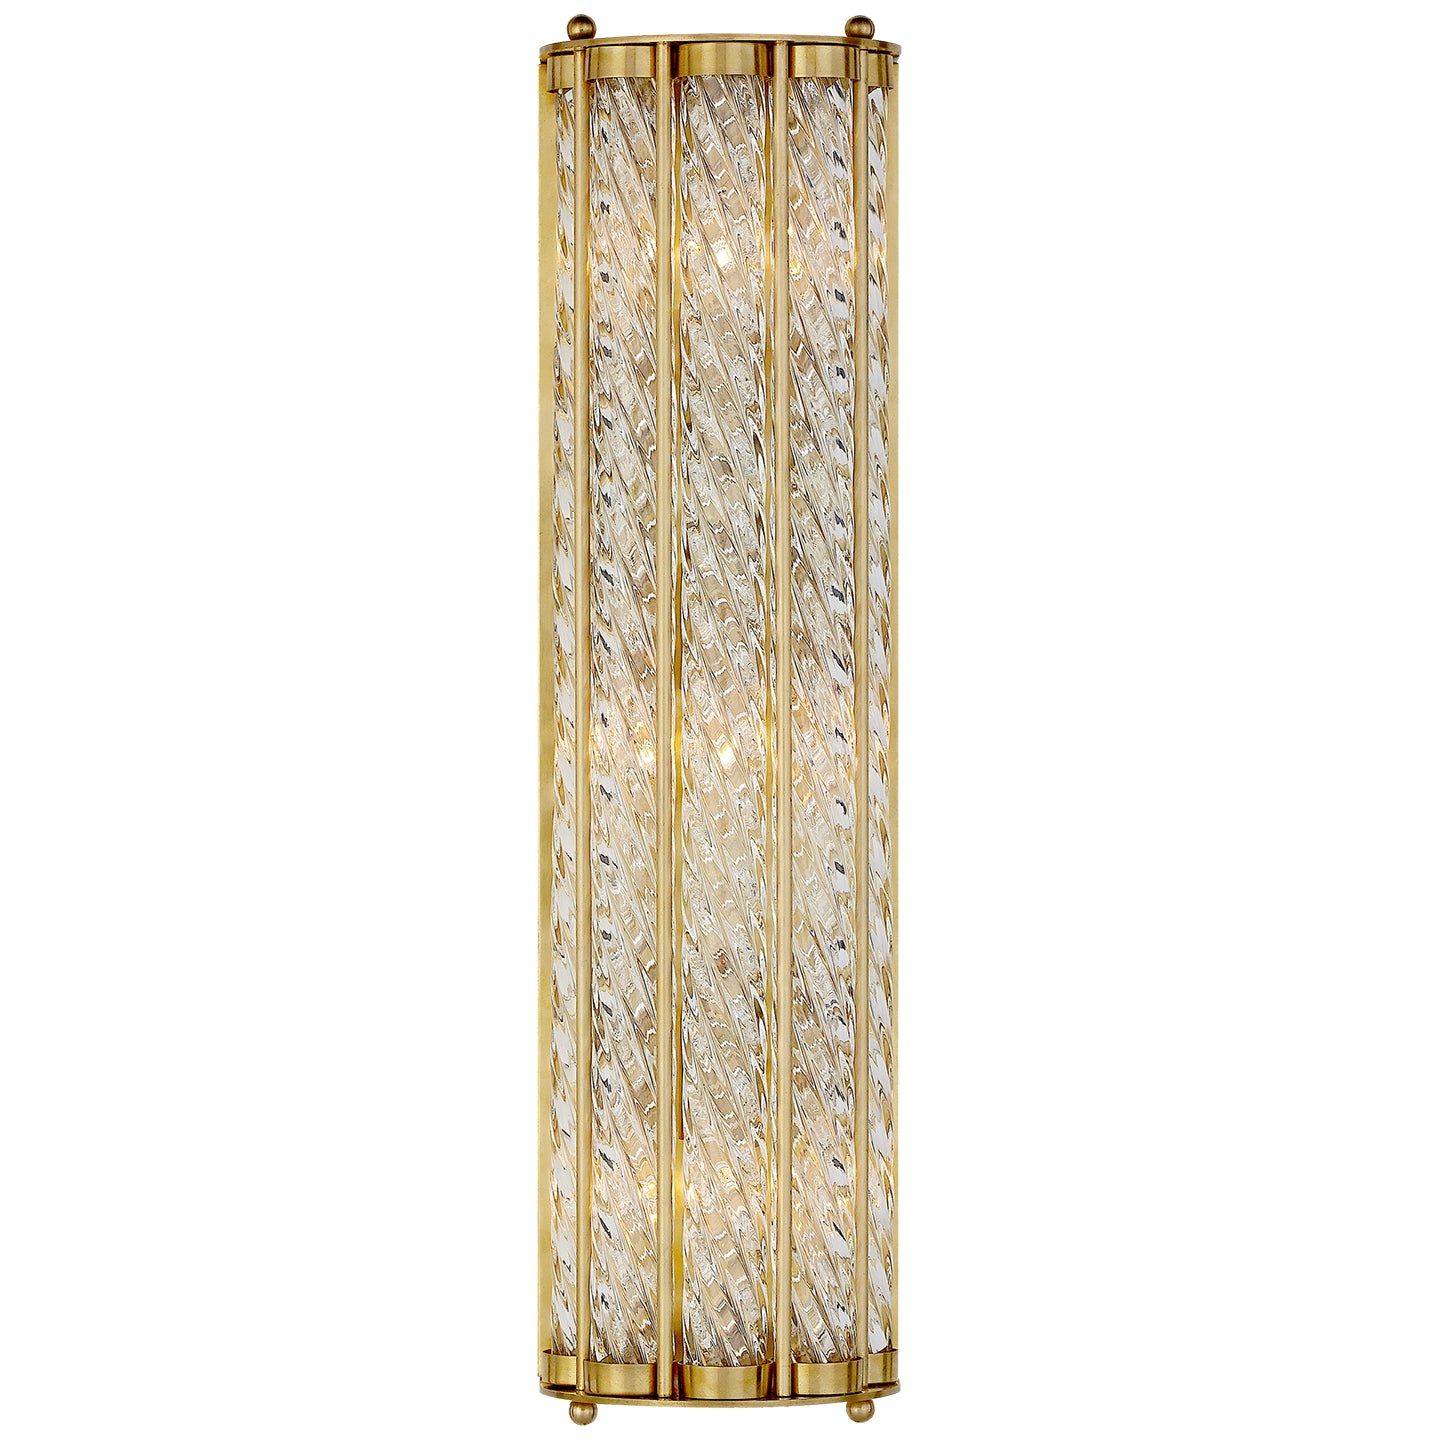 Load image into Gallery viewer, Visual Comfort Signature - ARN 2027HAB - Three Light Wall Sconce - Eaton - Hand-Rubbed Antique Brass
